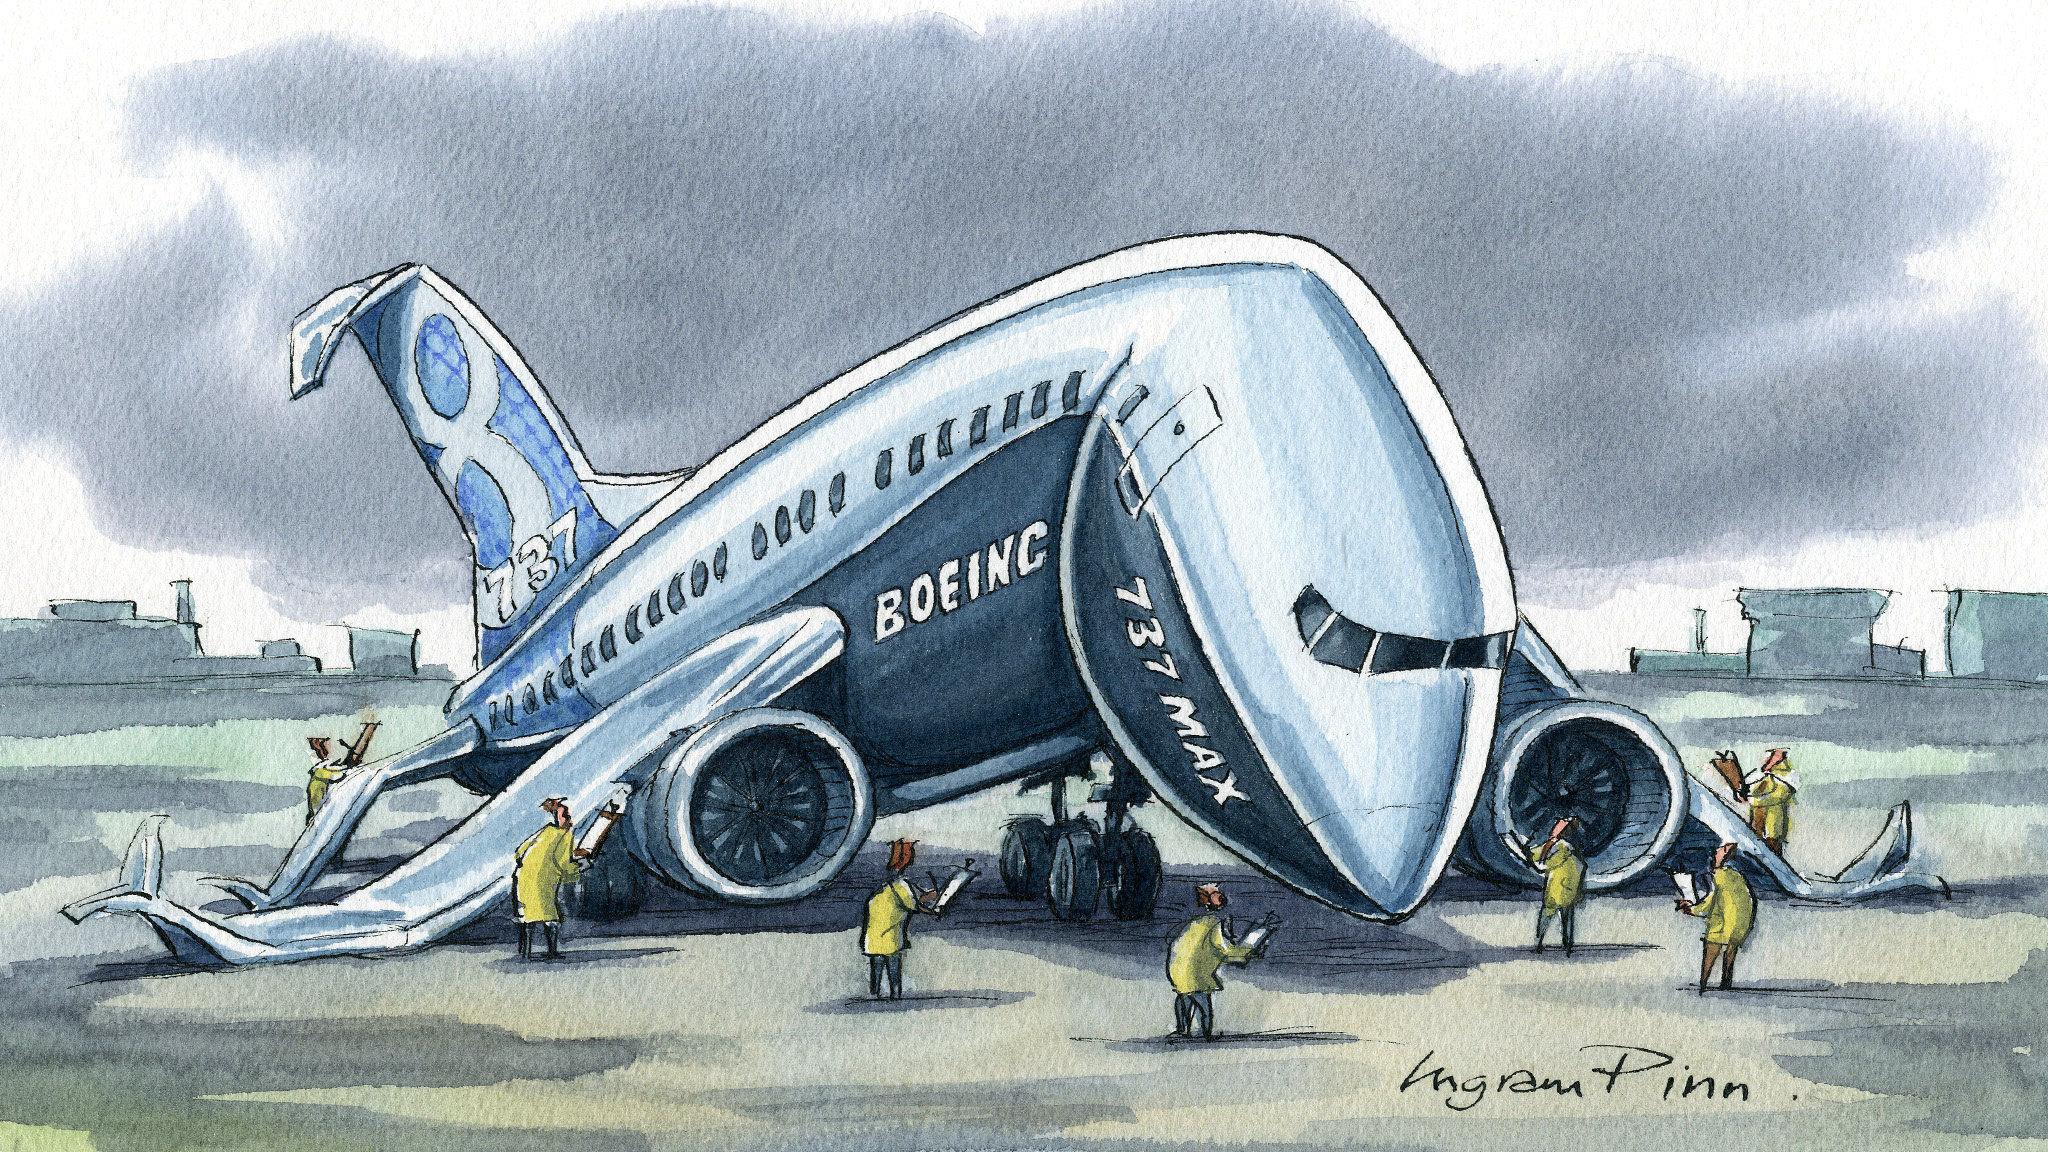 Boeing's hubris brought failure to the 737 Max